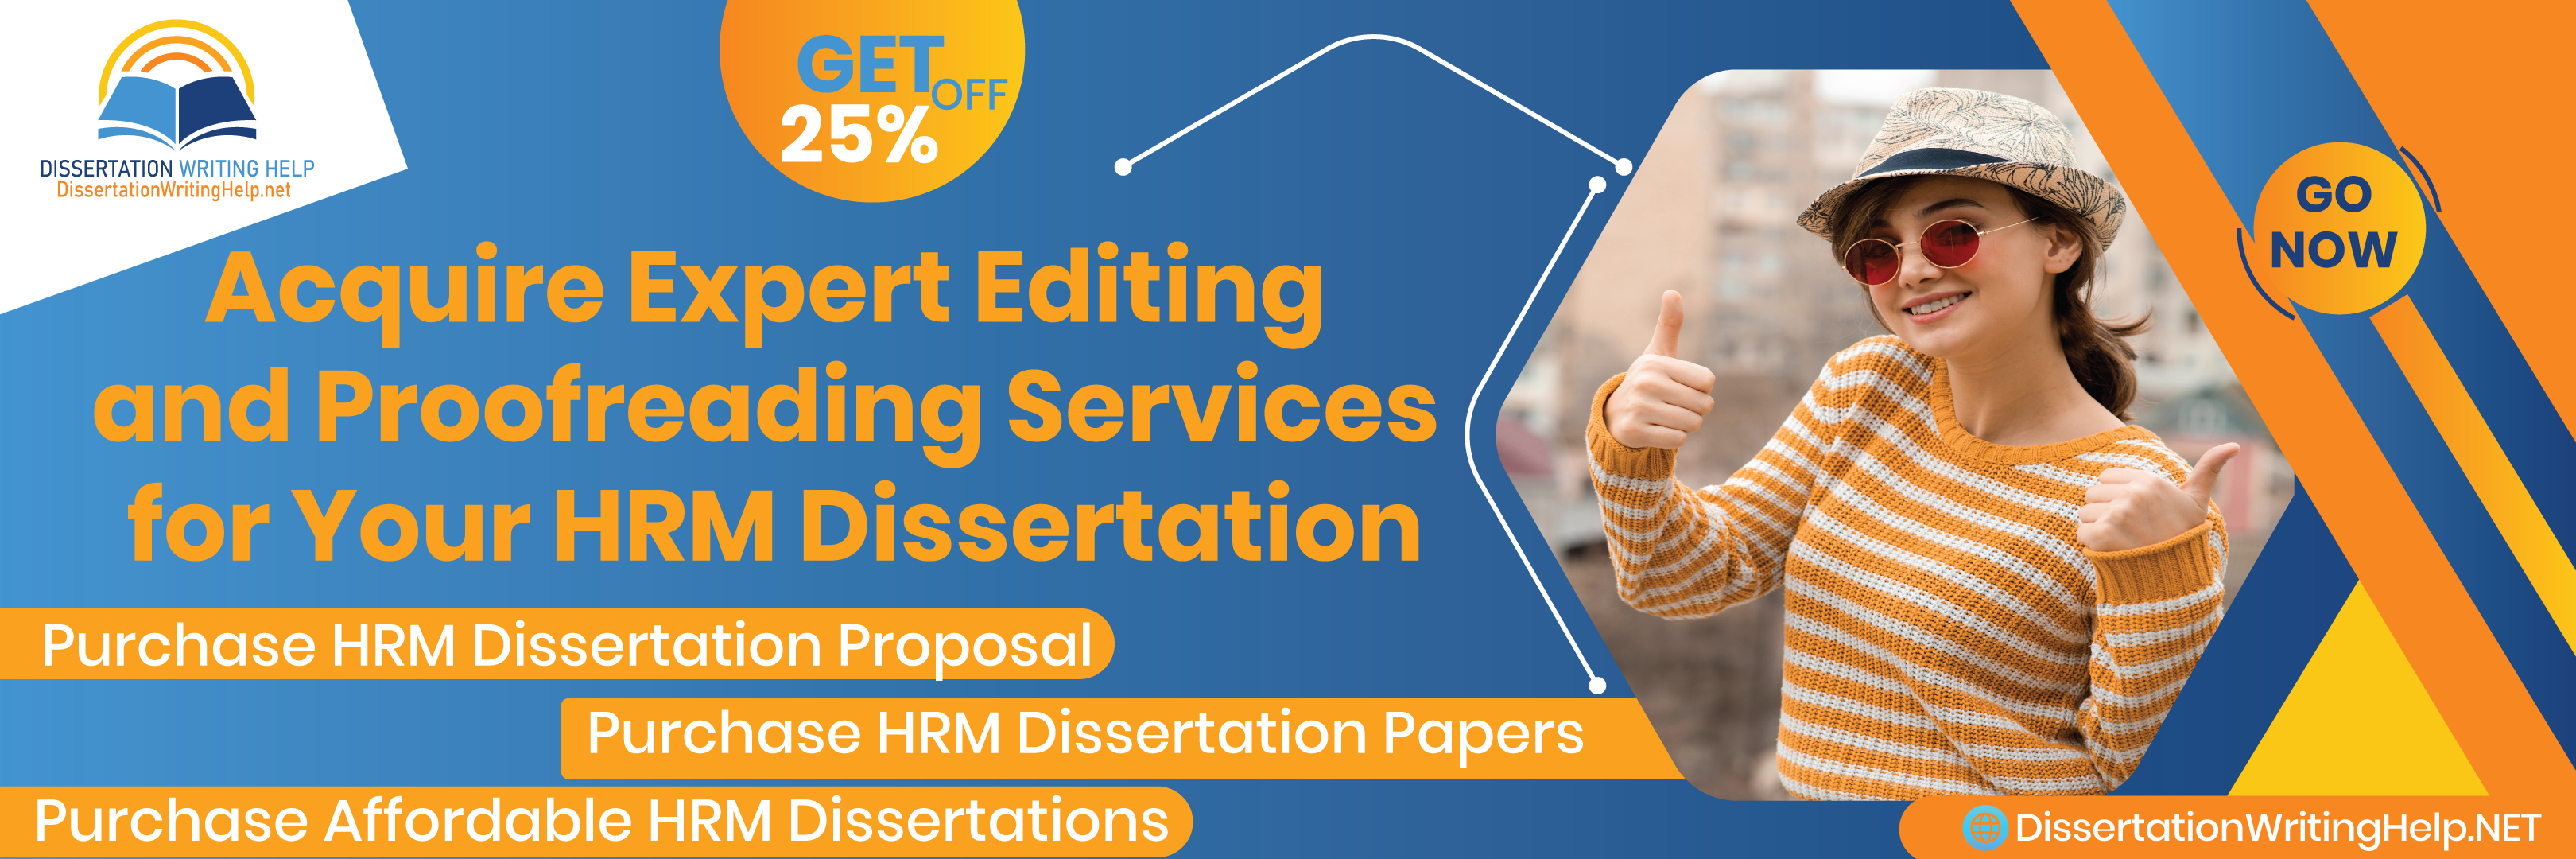 HRM Dissertation Editing and Proofreading Services